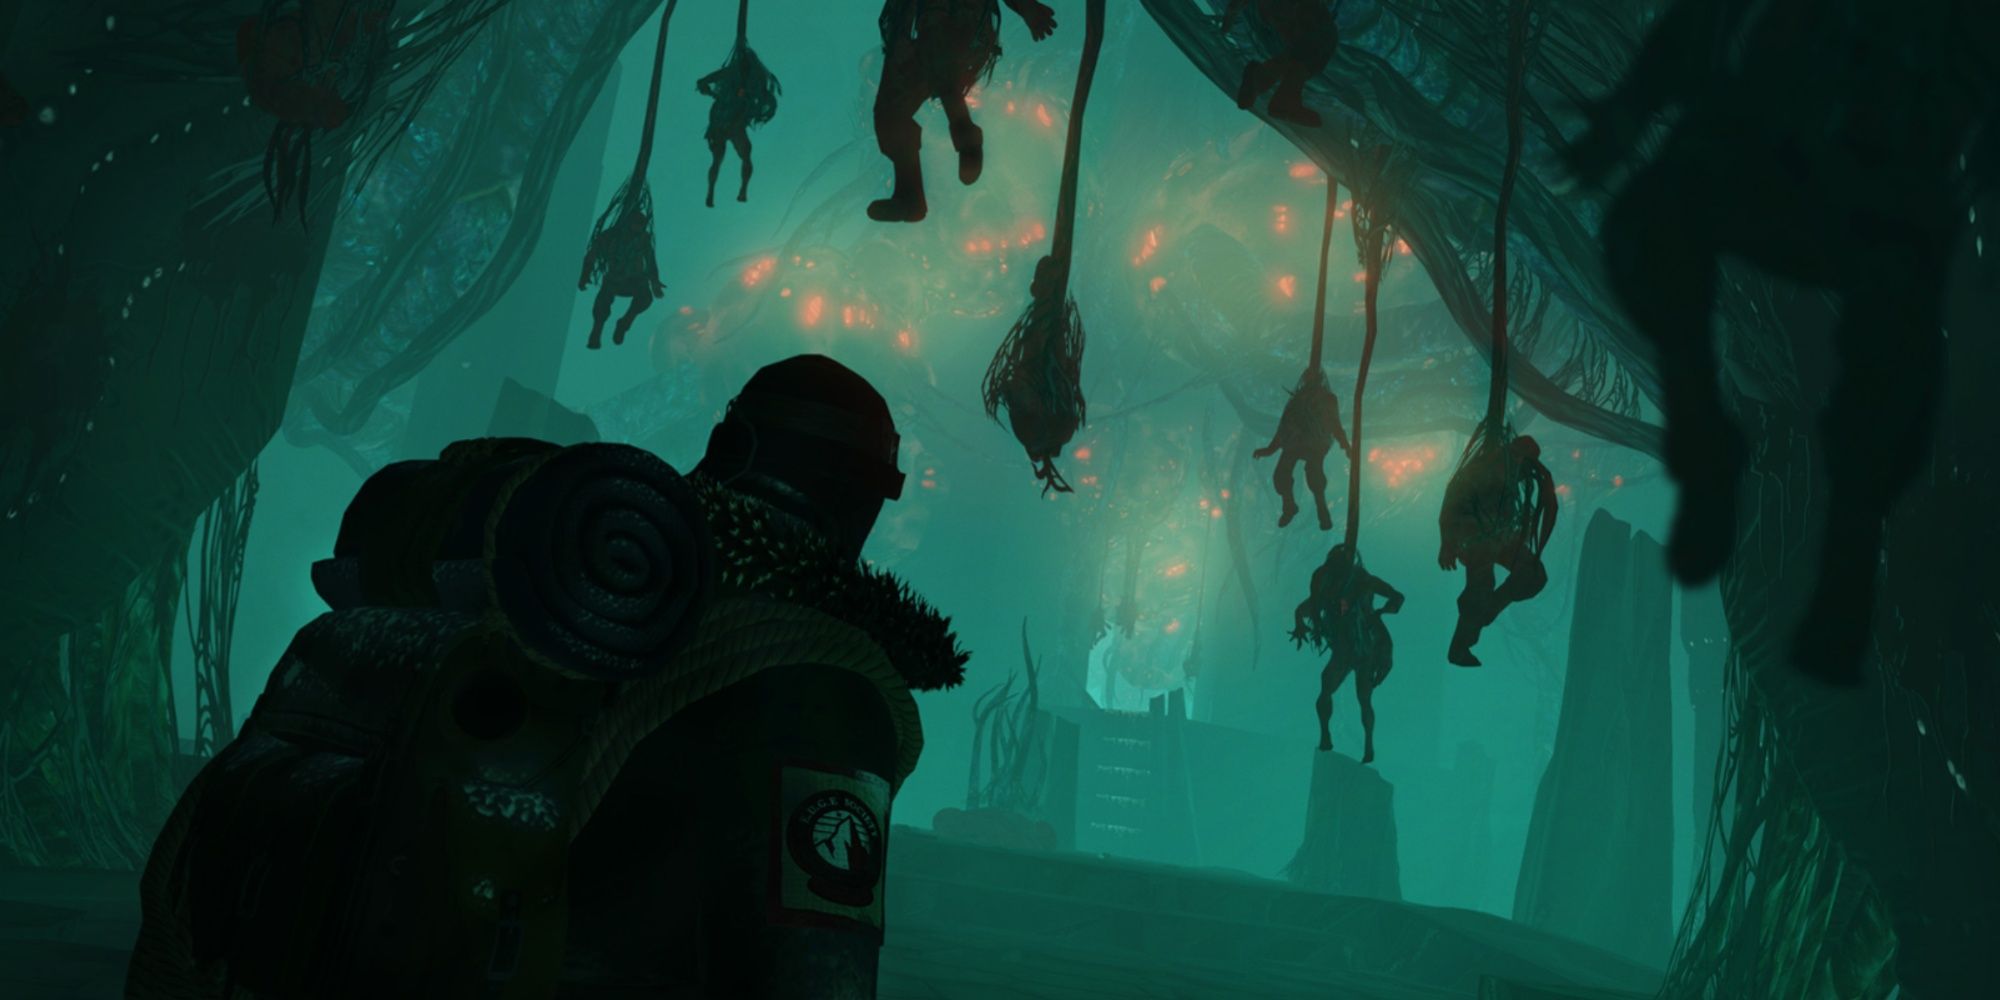 The protagonist Antarctic explorer walking into a chamber with bodies hanging from cocoons and an alien Lovecraftian creature with red orbs seen in the background.